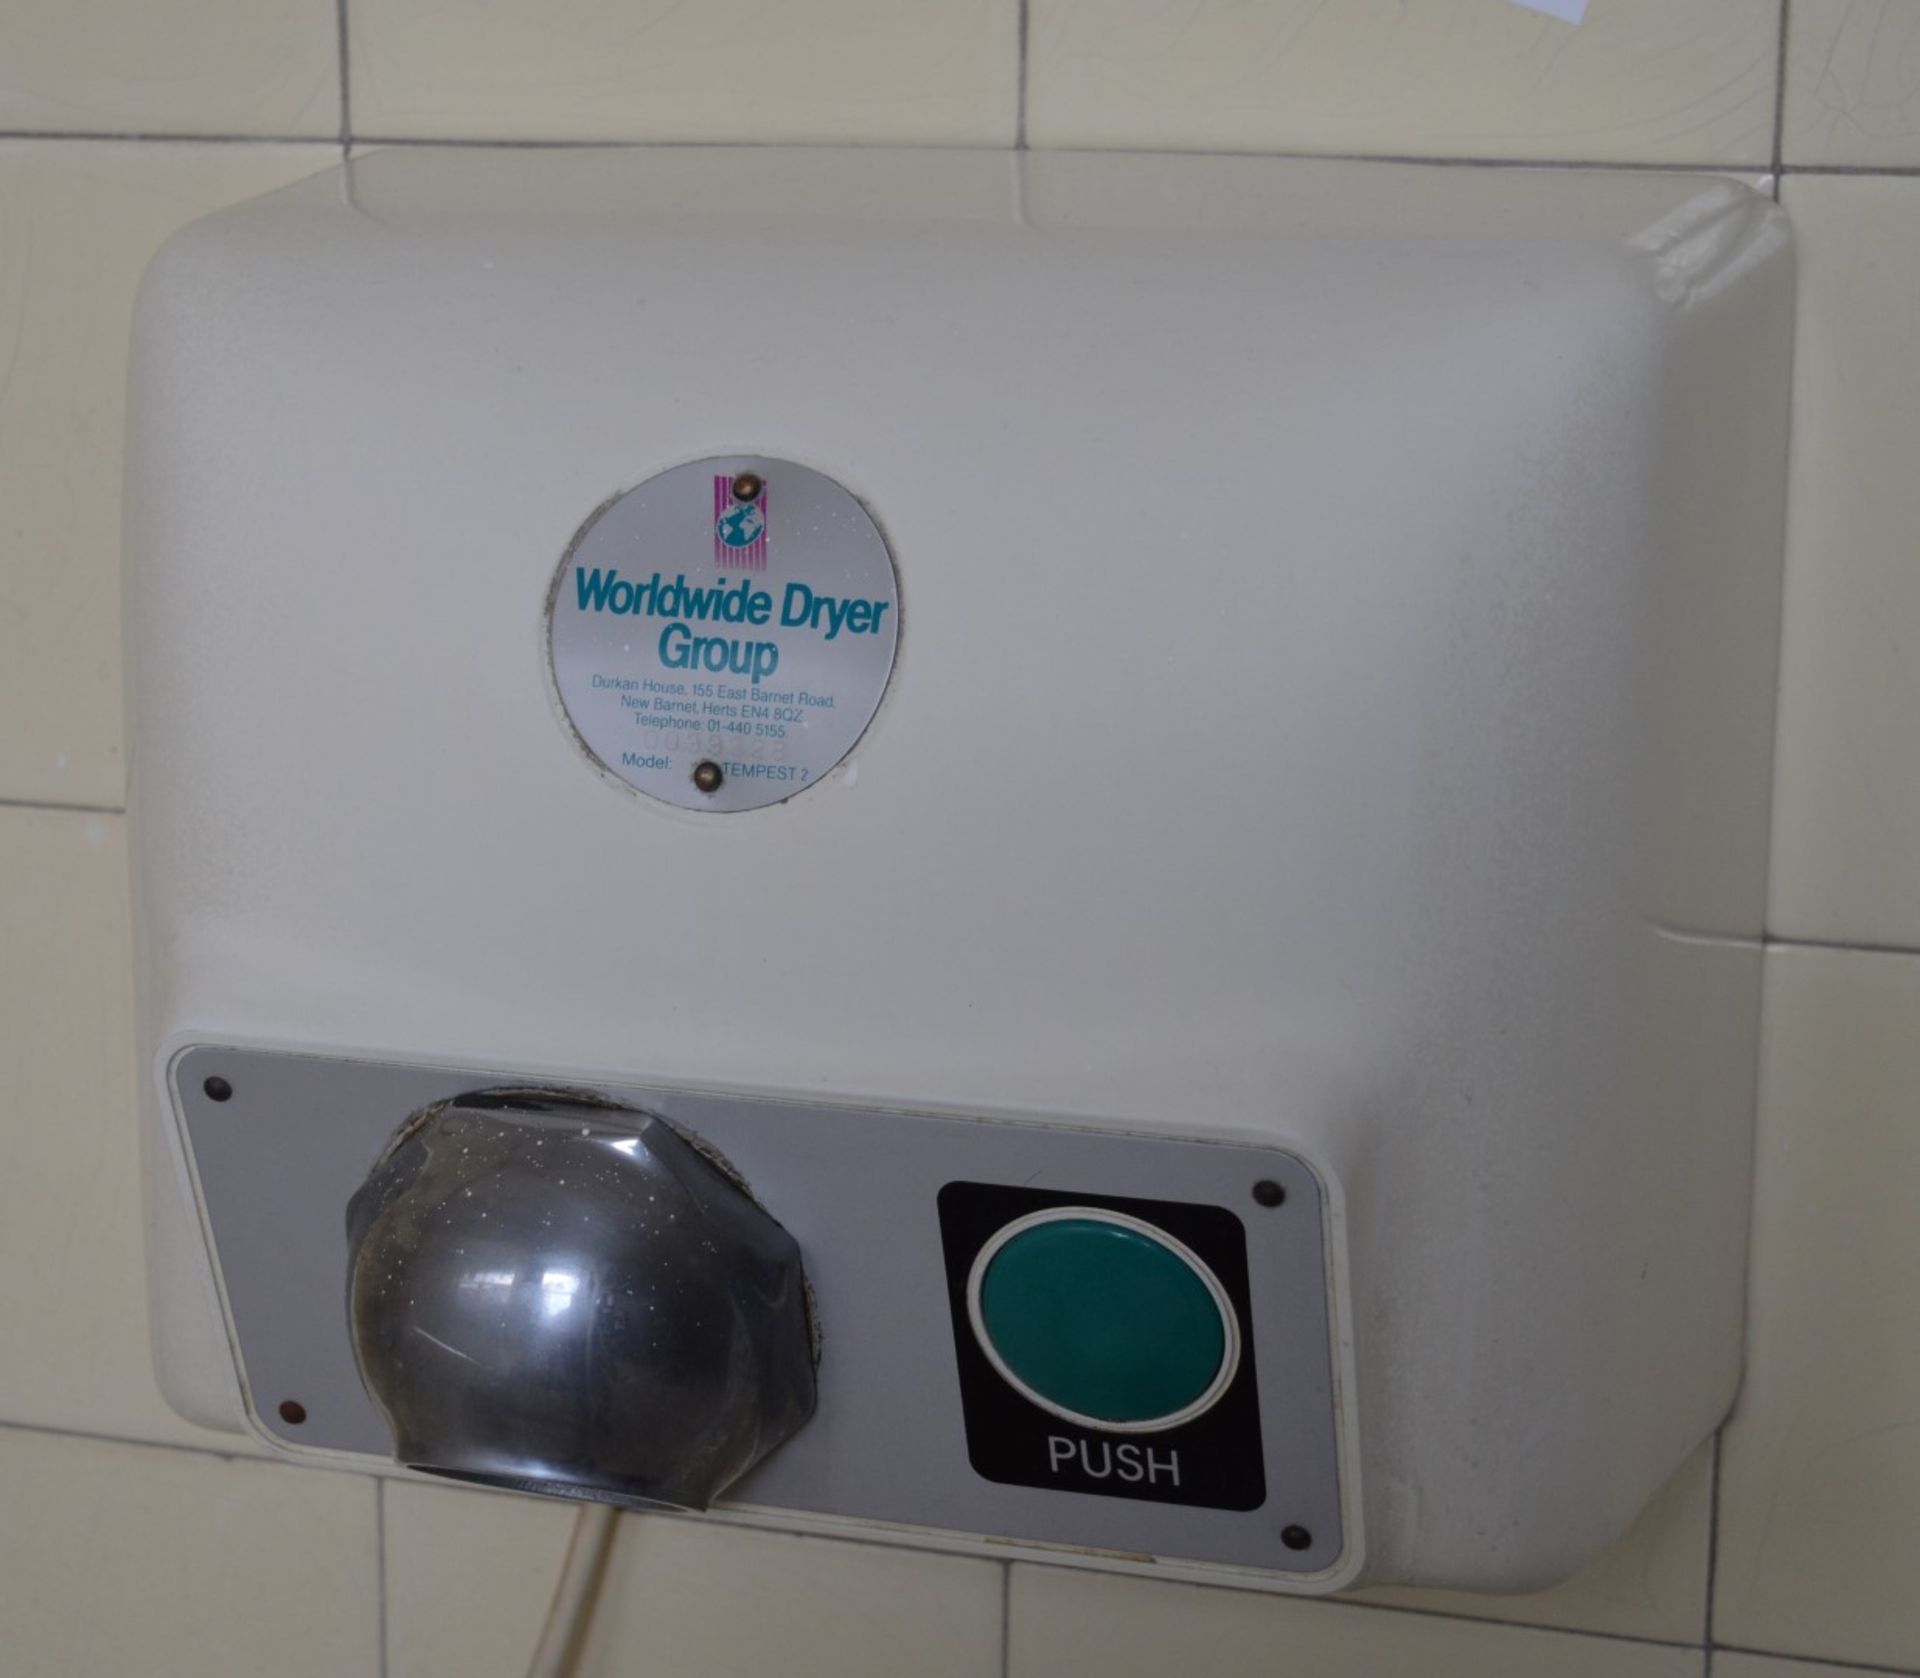 1 x Vintage Worldwide Dryer Group Electric Hand Dryer - Model Tempest 2 - 30 x 25 cms - Ref 376 2F -